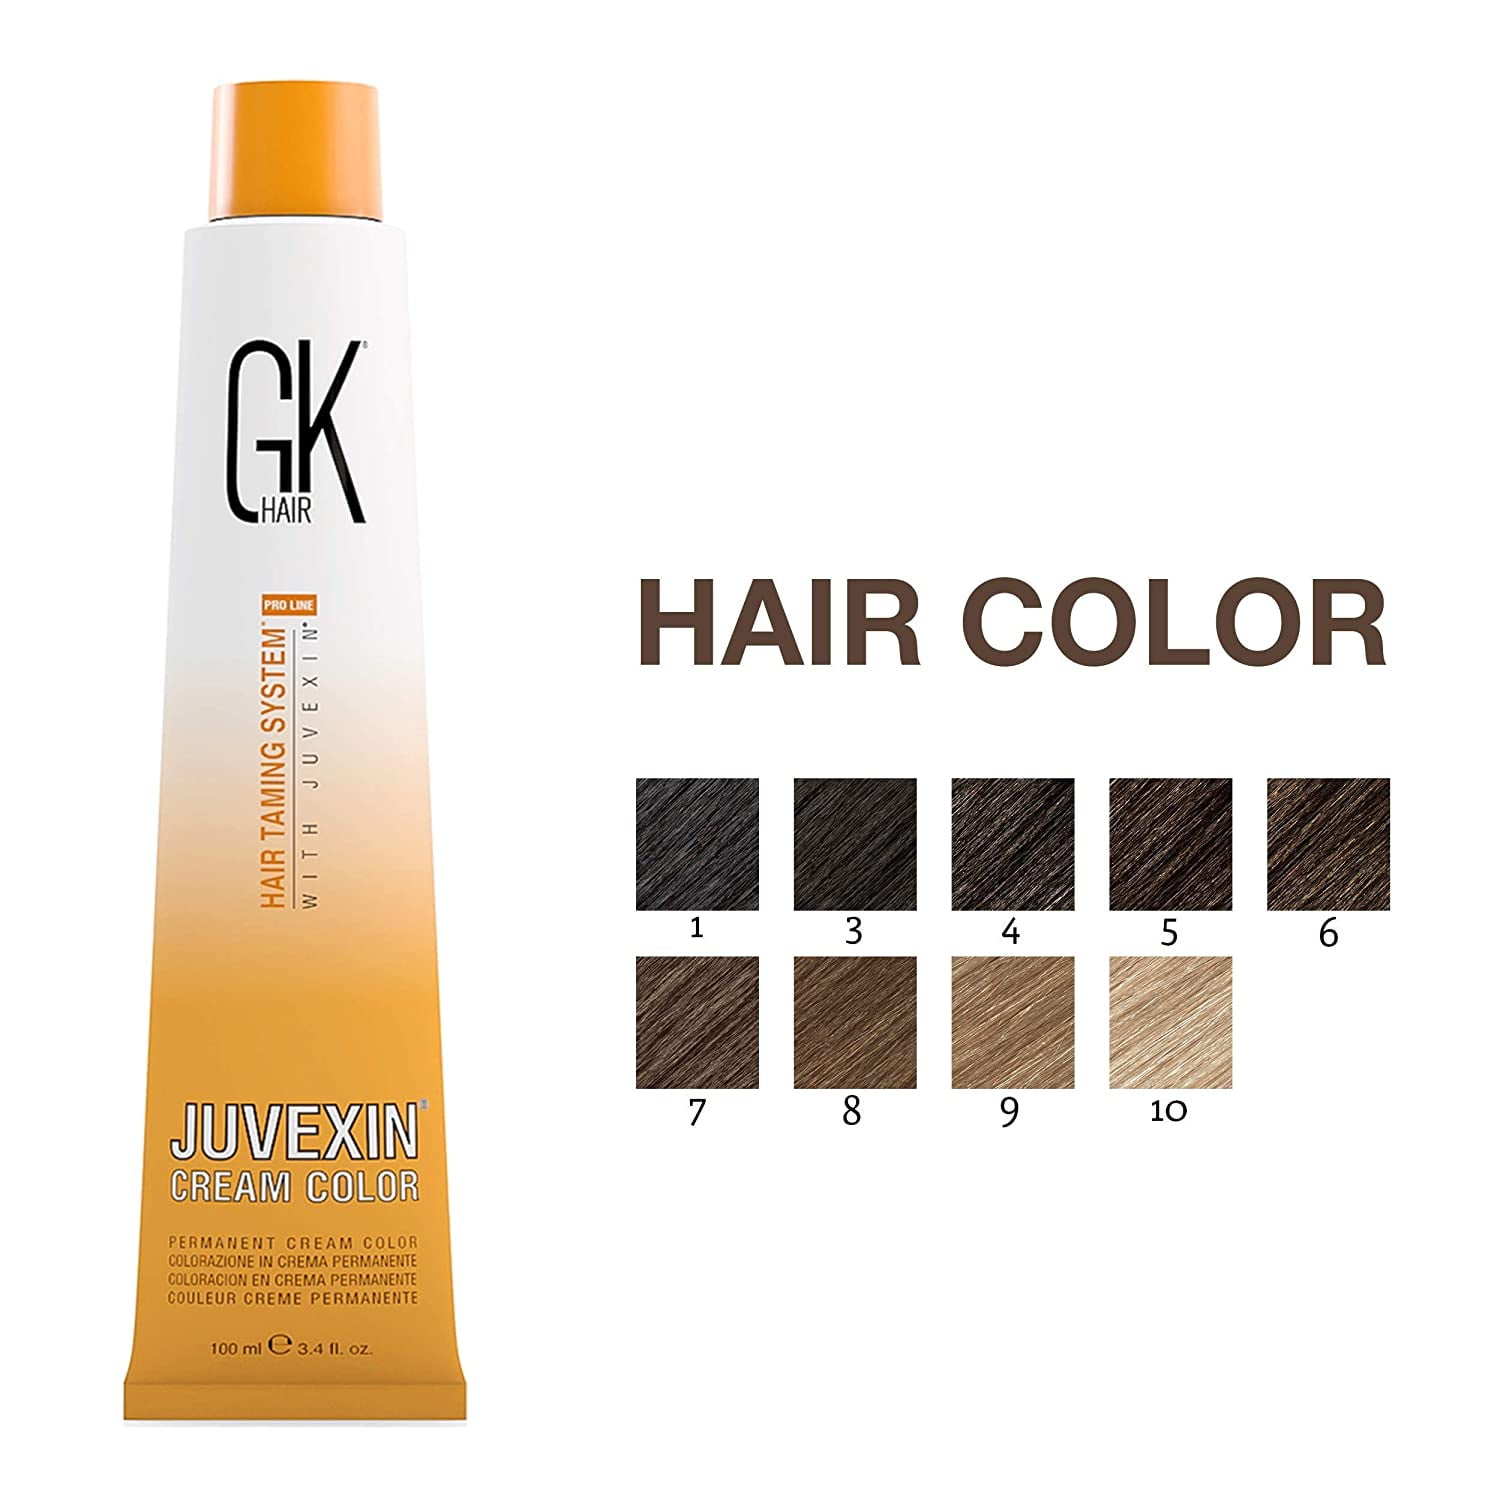 GK HAIR Global Keratin Semi Permanent Hair Cream Color with 87+ Shades (  Fl Oz/100ml) Nourishing & Cleansing Colors for Styling High Performance  Long Lasting Natural Toner Hair Dye Tubes - Unisex -